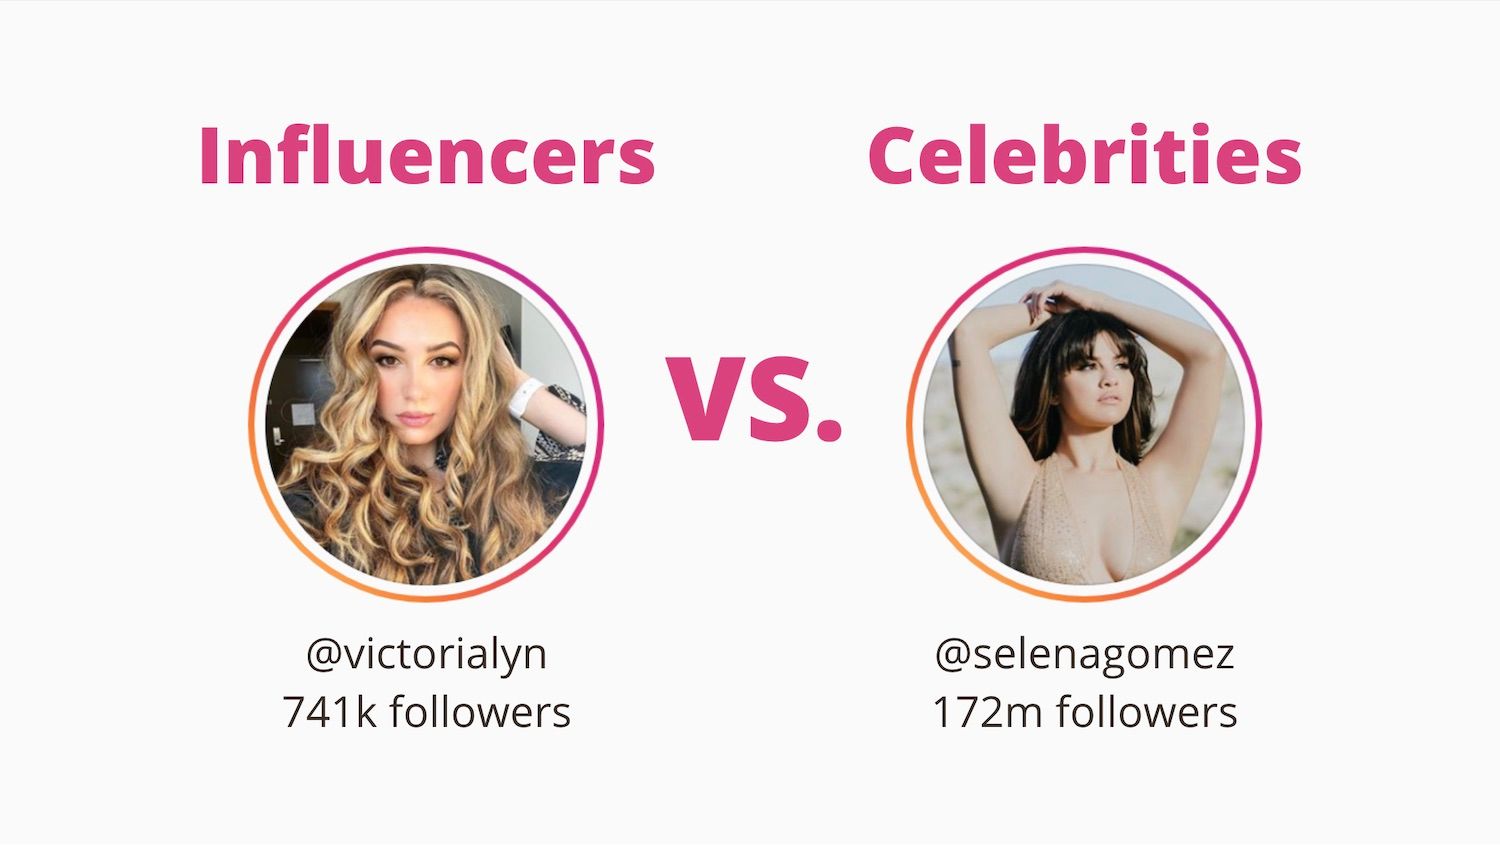 Should You Use Influencers or Celebrities for Your Marketing Campaign?